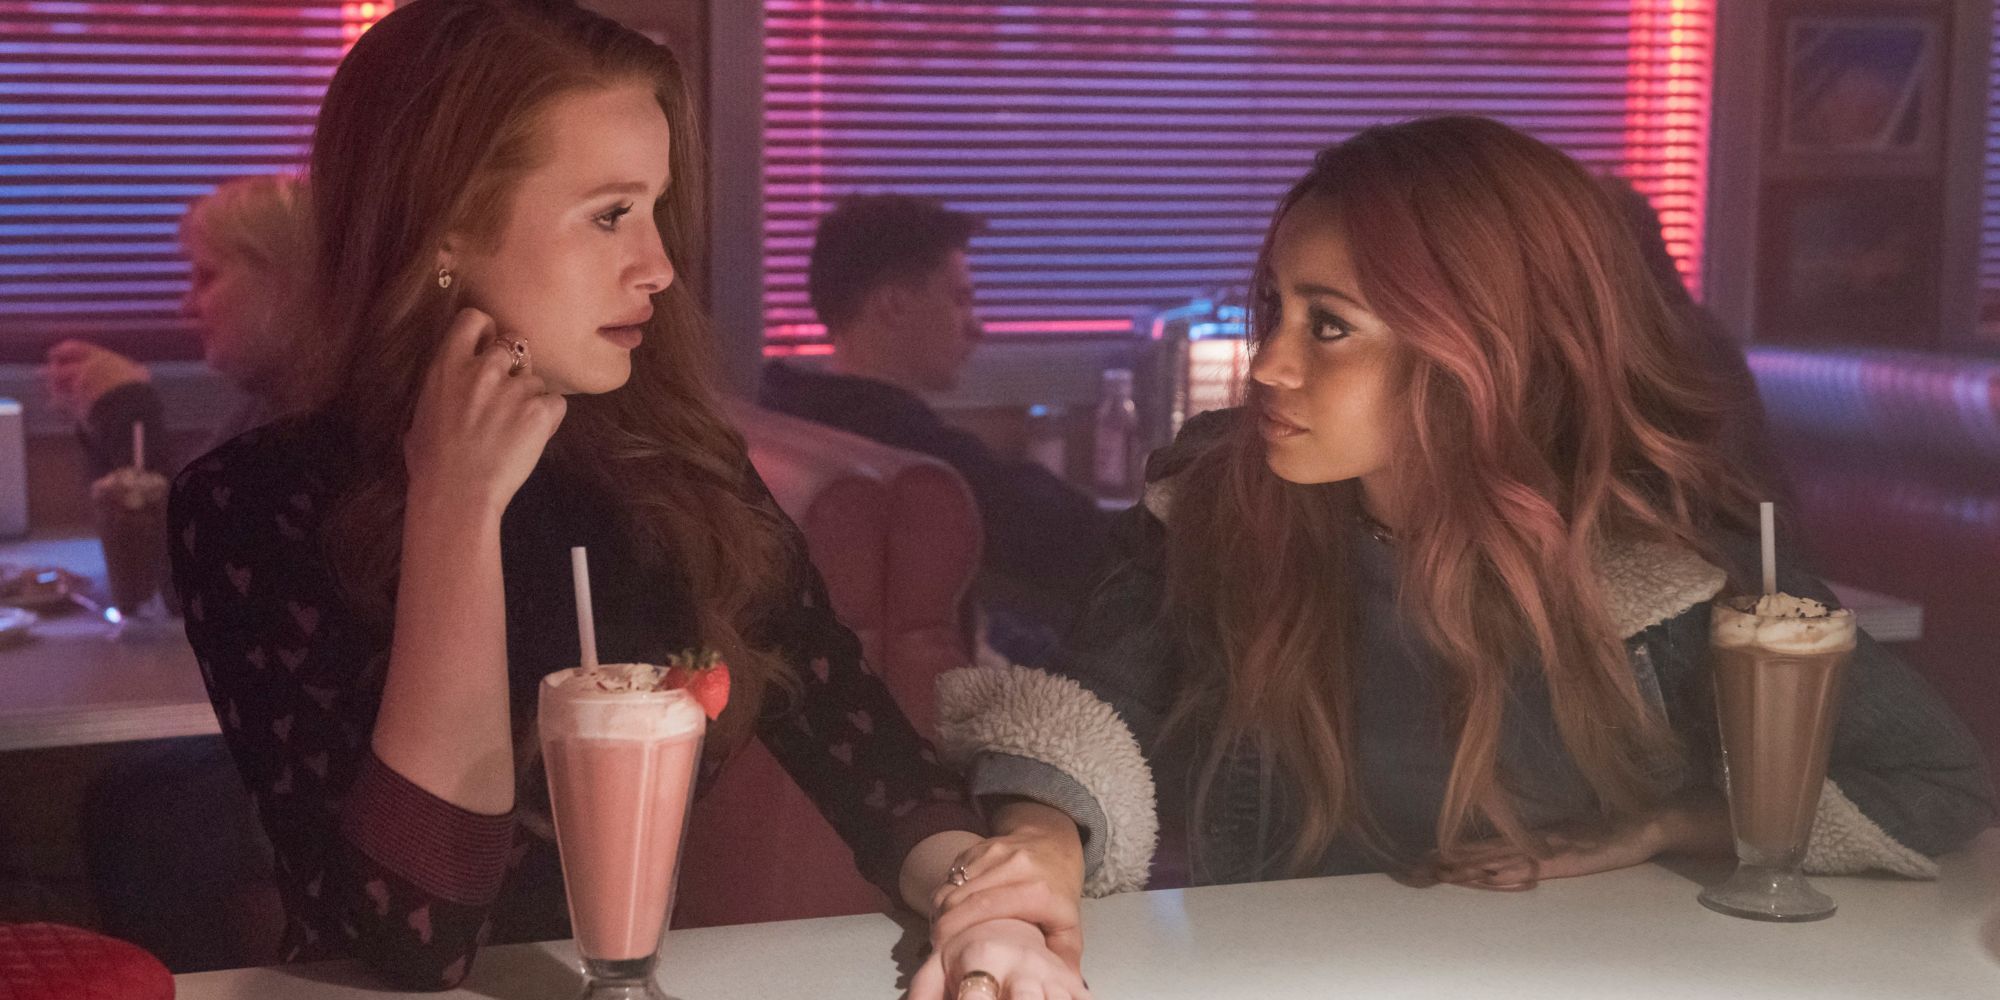 Cheryl comes out to Toni at Pop's in Riverdale